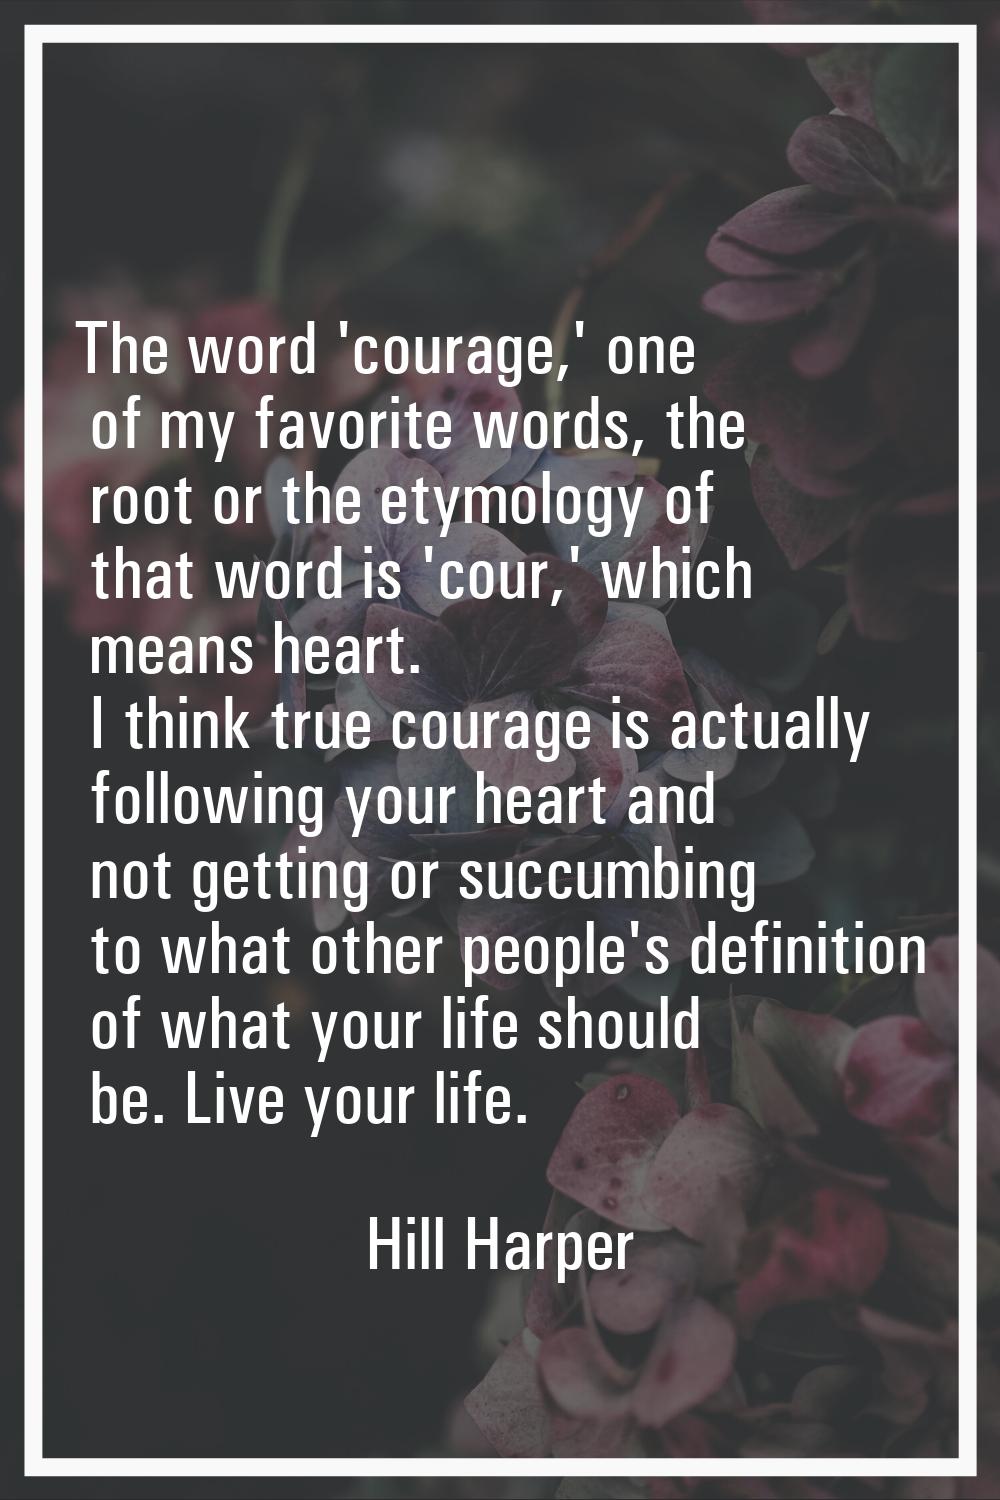 The word 'courage,' one of my favorite words, the root or the etymology of that word is 'cour,' whi